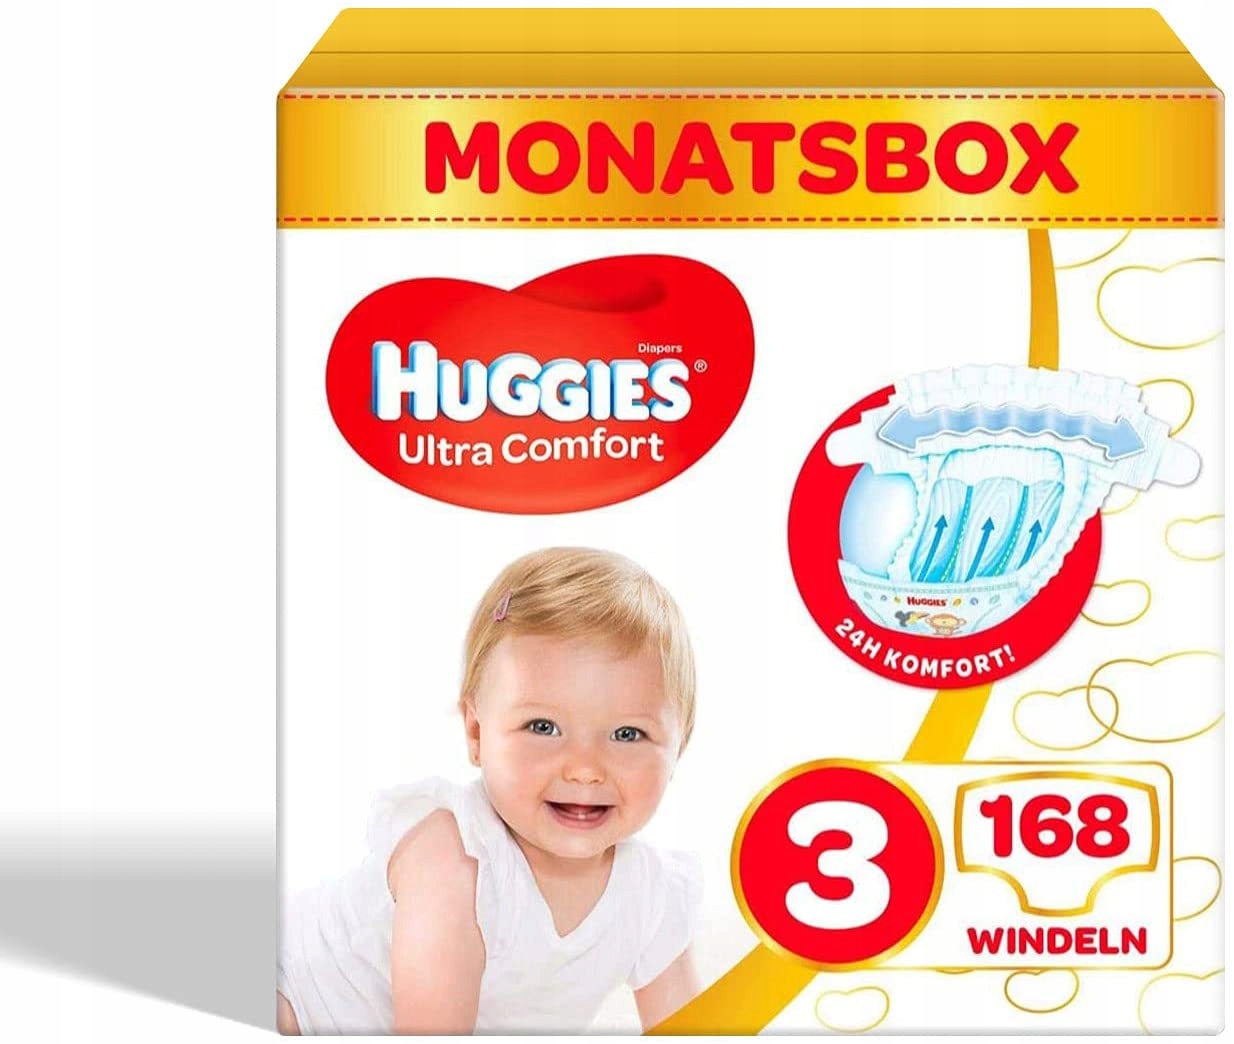 pampers molicare